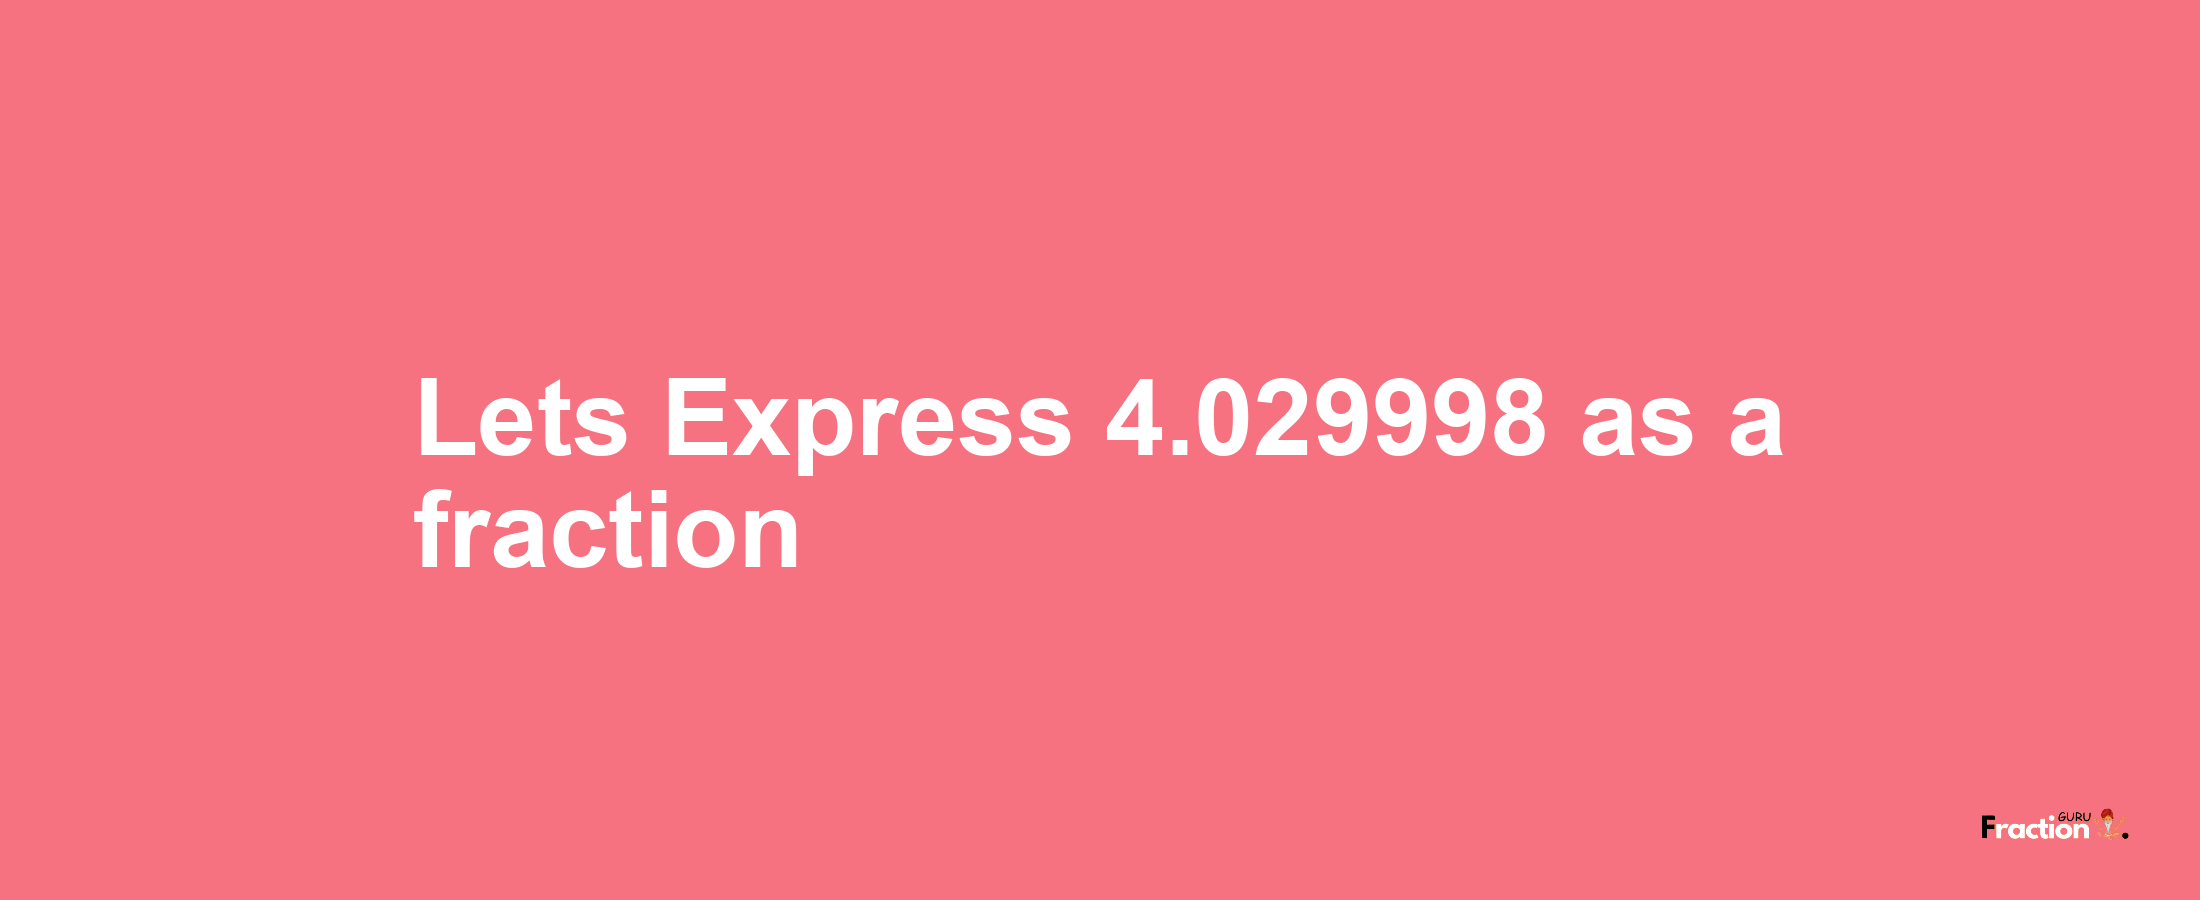 Lets Express 4.029998 as afraction